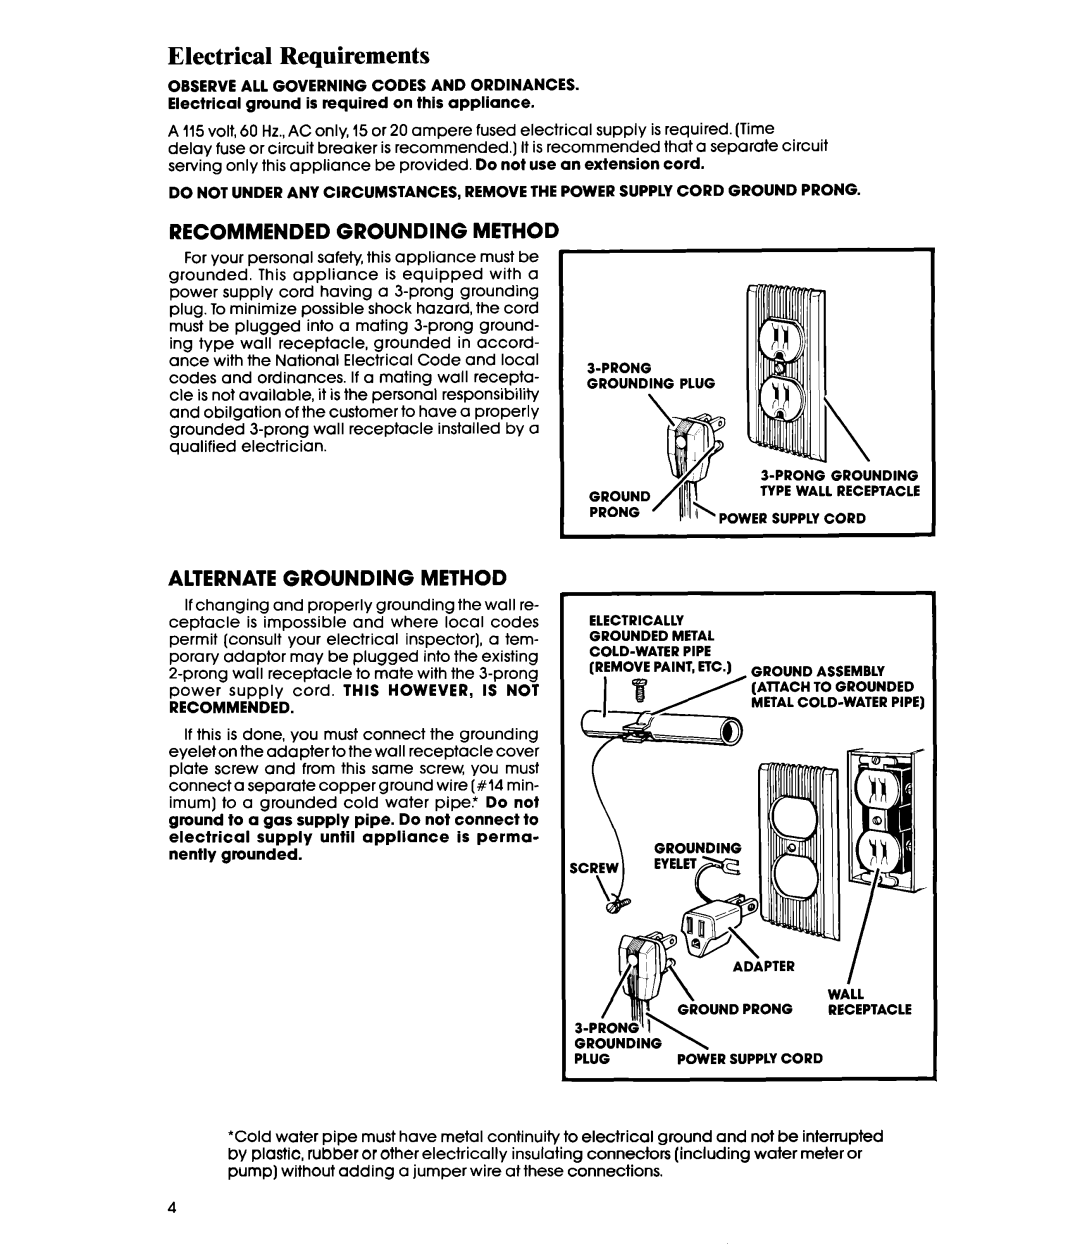 Whirlpool AD0402XM0 manual Electrical Requirements, Recommended Grounding Method, Alternate Grounding Method 